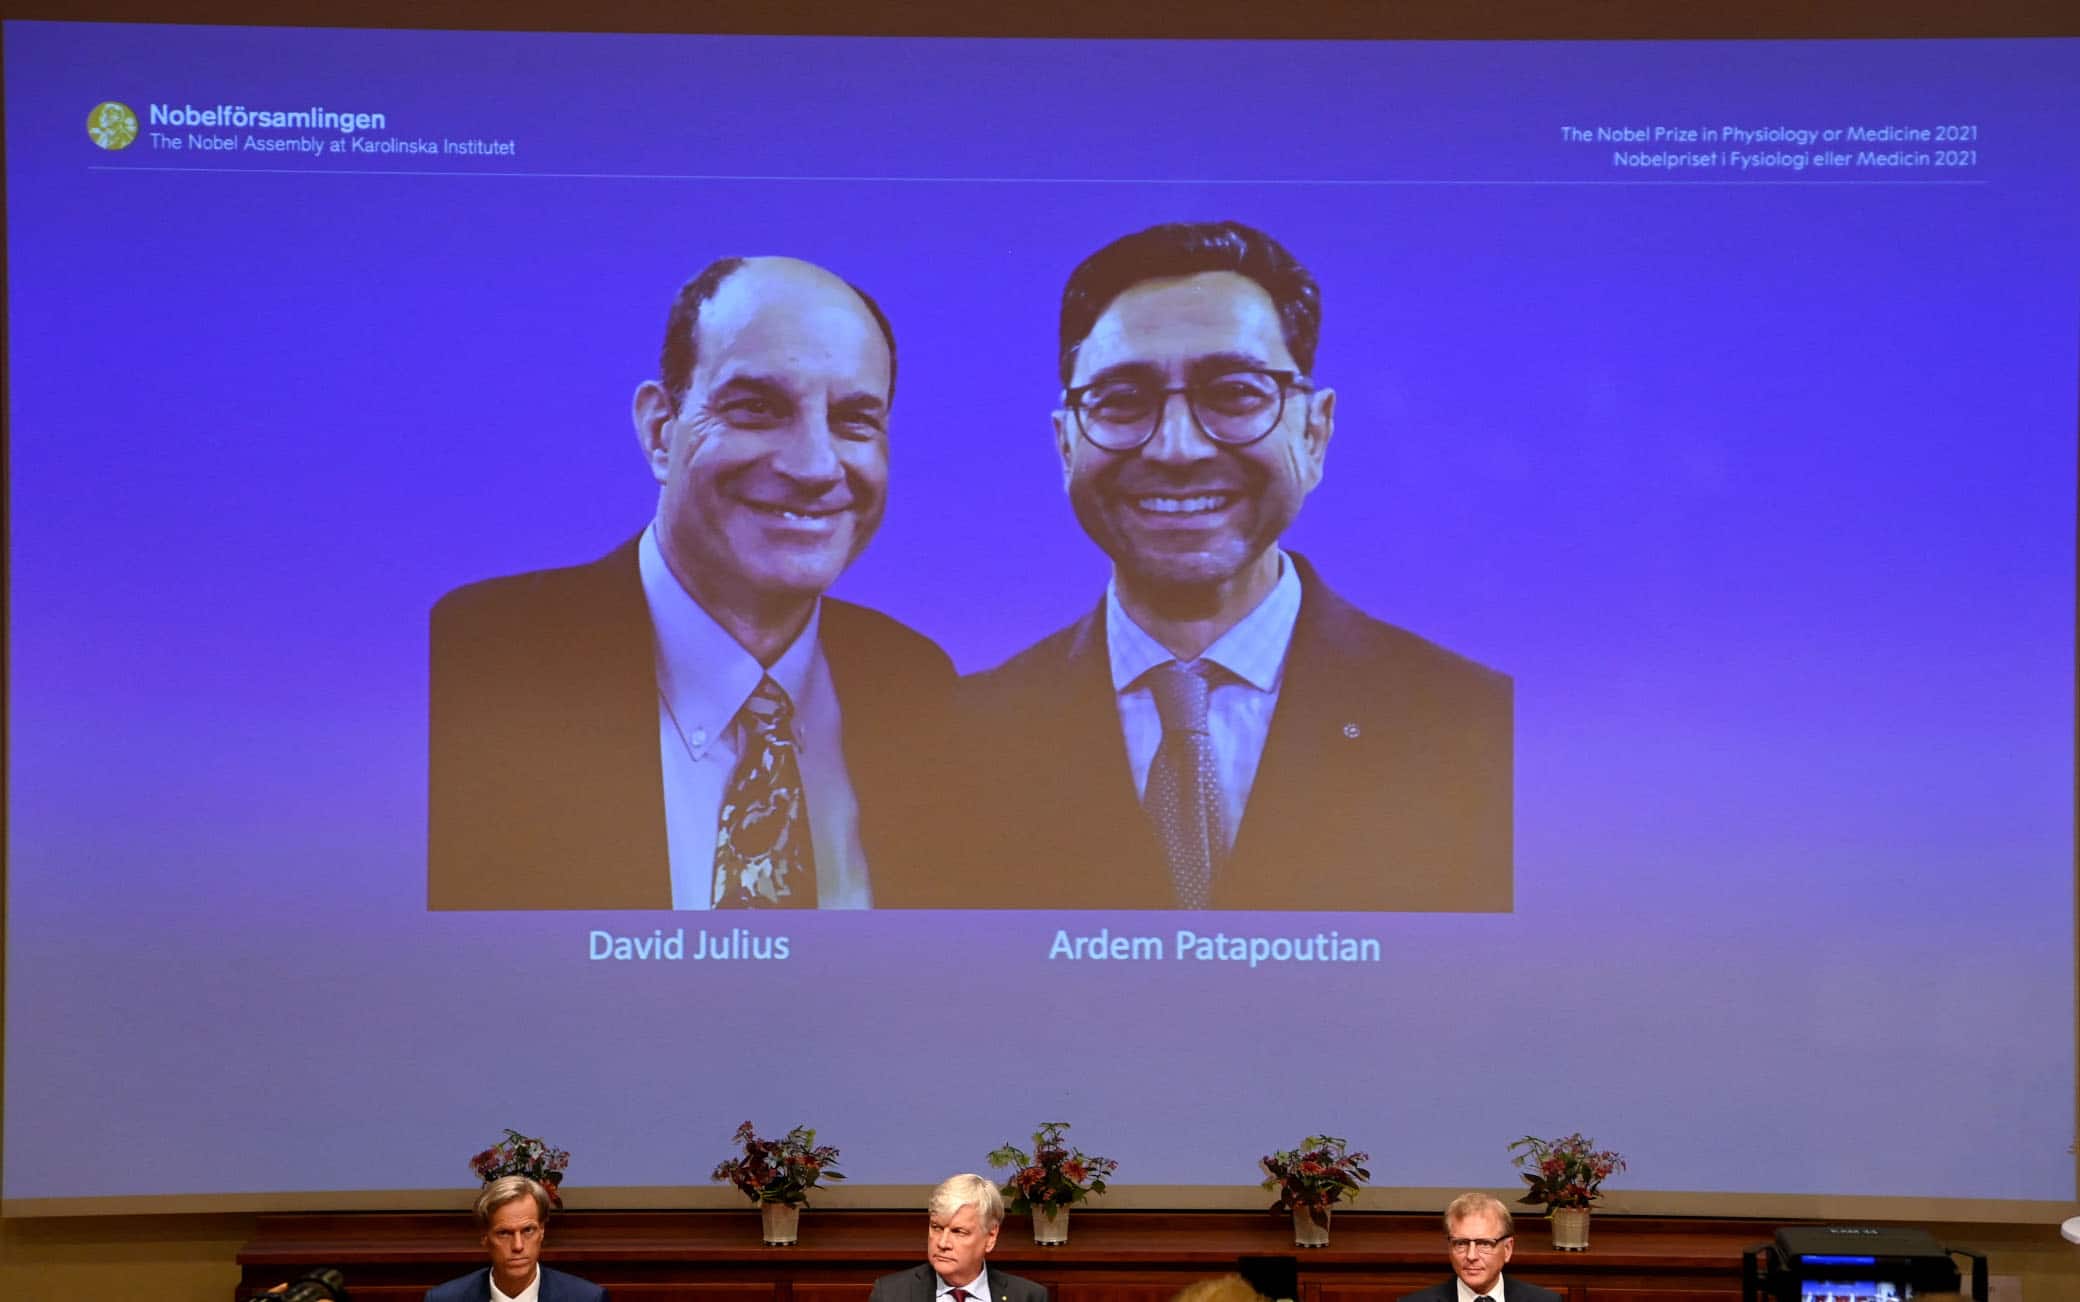 Members of the Nobel Committee sit in front of a screen displaying the winners of the 2021 Nobel Prize in Physiology or Medicine David Julius (L) and Ardem Patapoutian, during a press conference at the Karolinska Institute in Stockholm, Sweden, on October 4, 2021. - US scientists David Julius and Ardem Patapoutian won the Nobel Medicine Prize for discoveries on receptors for temperature and touch. (Photo by Jonathan NACKSTRAND / AFP) (Photo by JONATHAN NACKSTRAND/AFP via Getty Images)